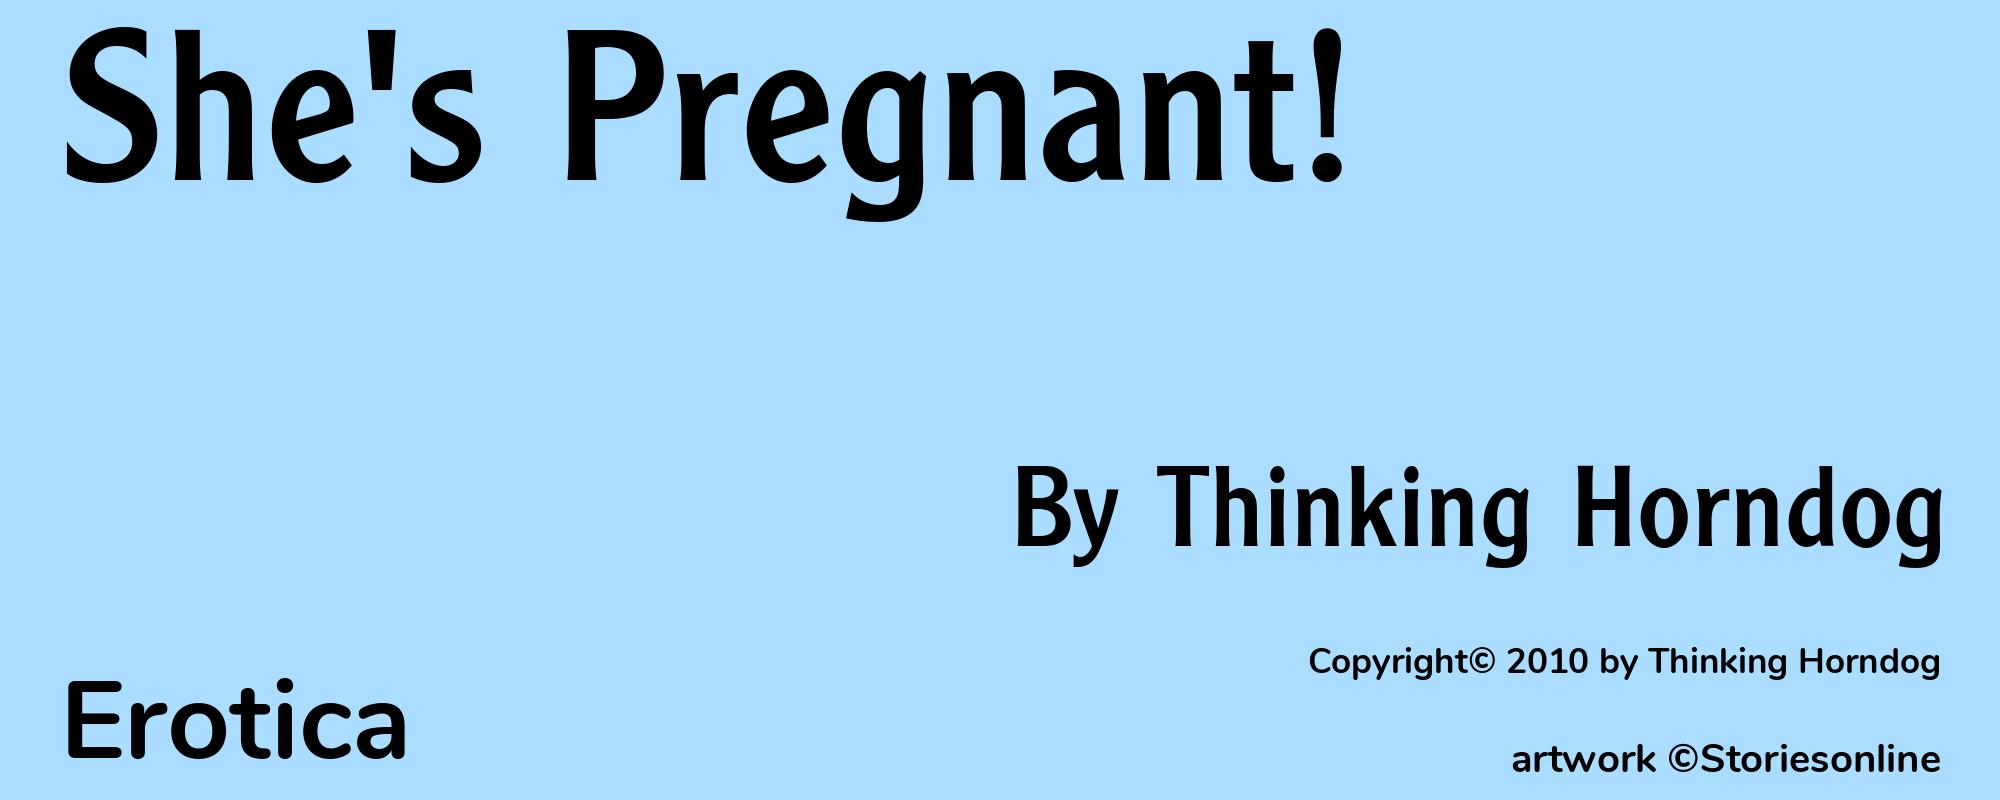 She's Pregnant! - Cover